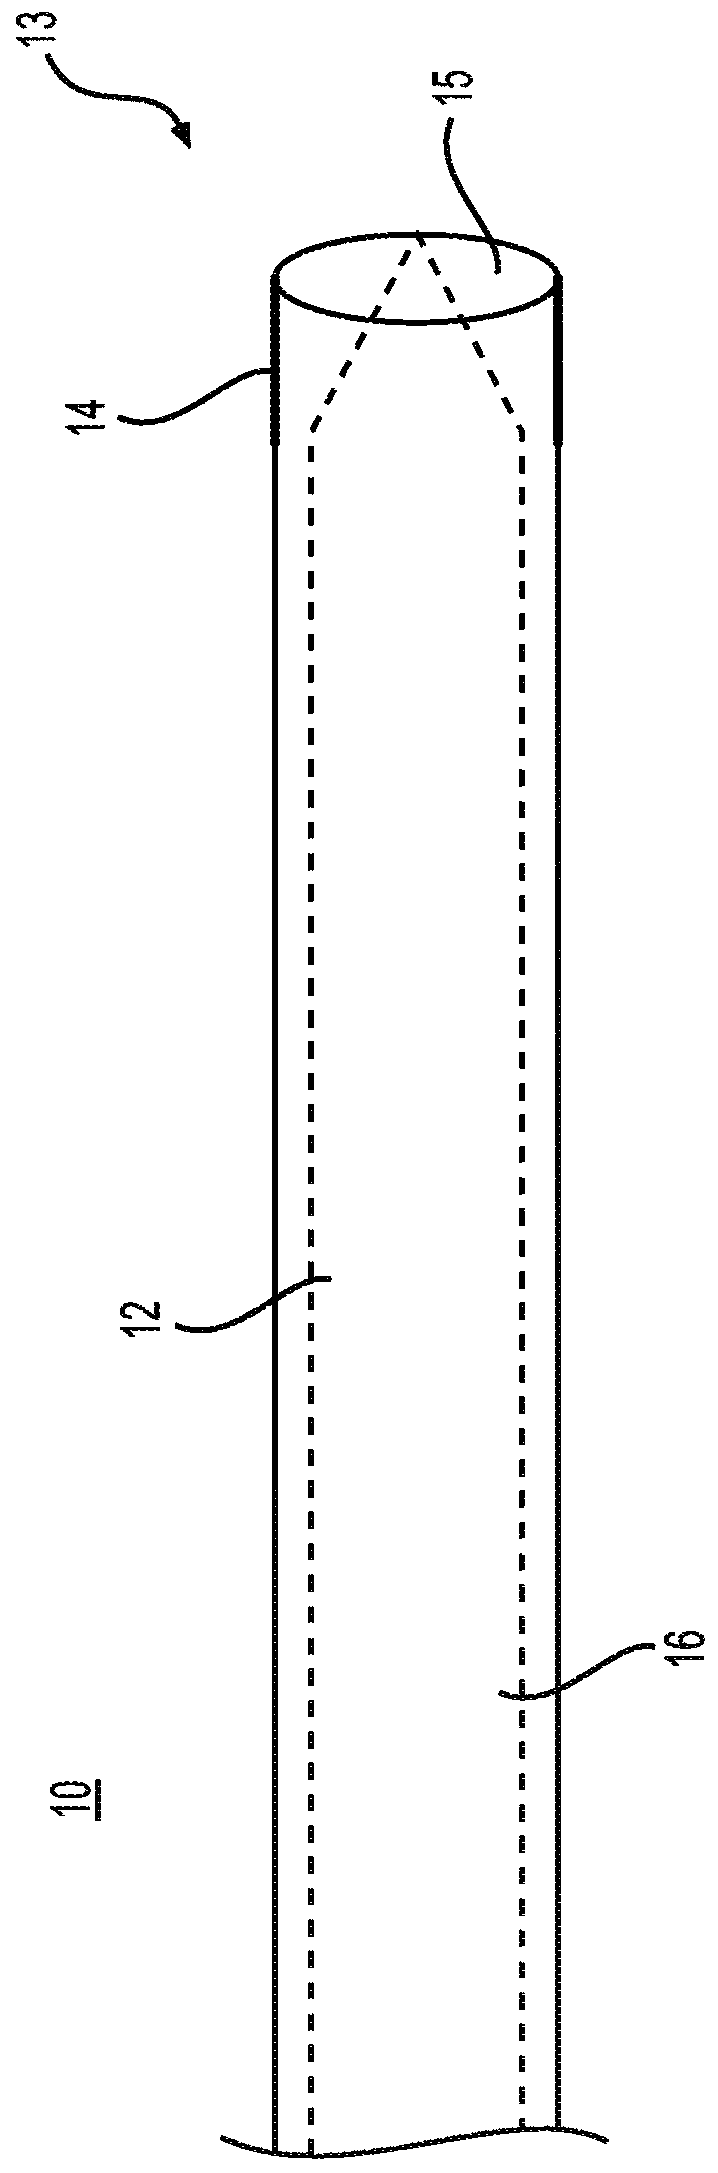 Directional balloon transseptal insertion device for medical procedures